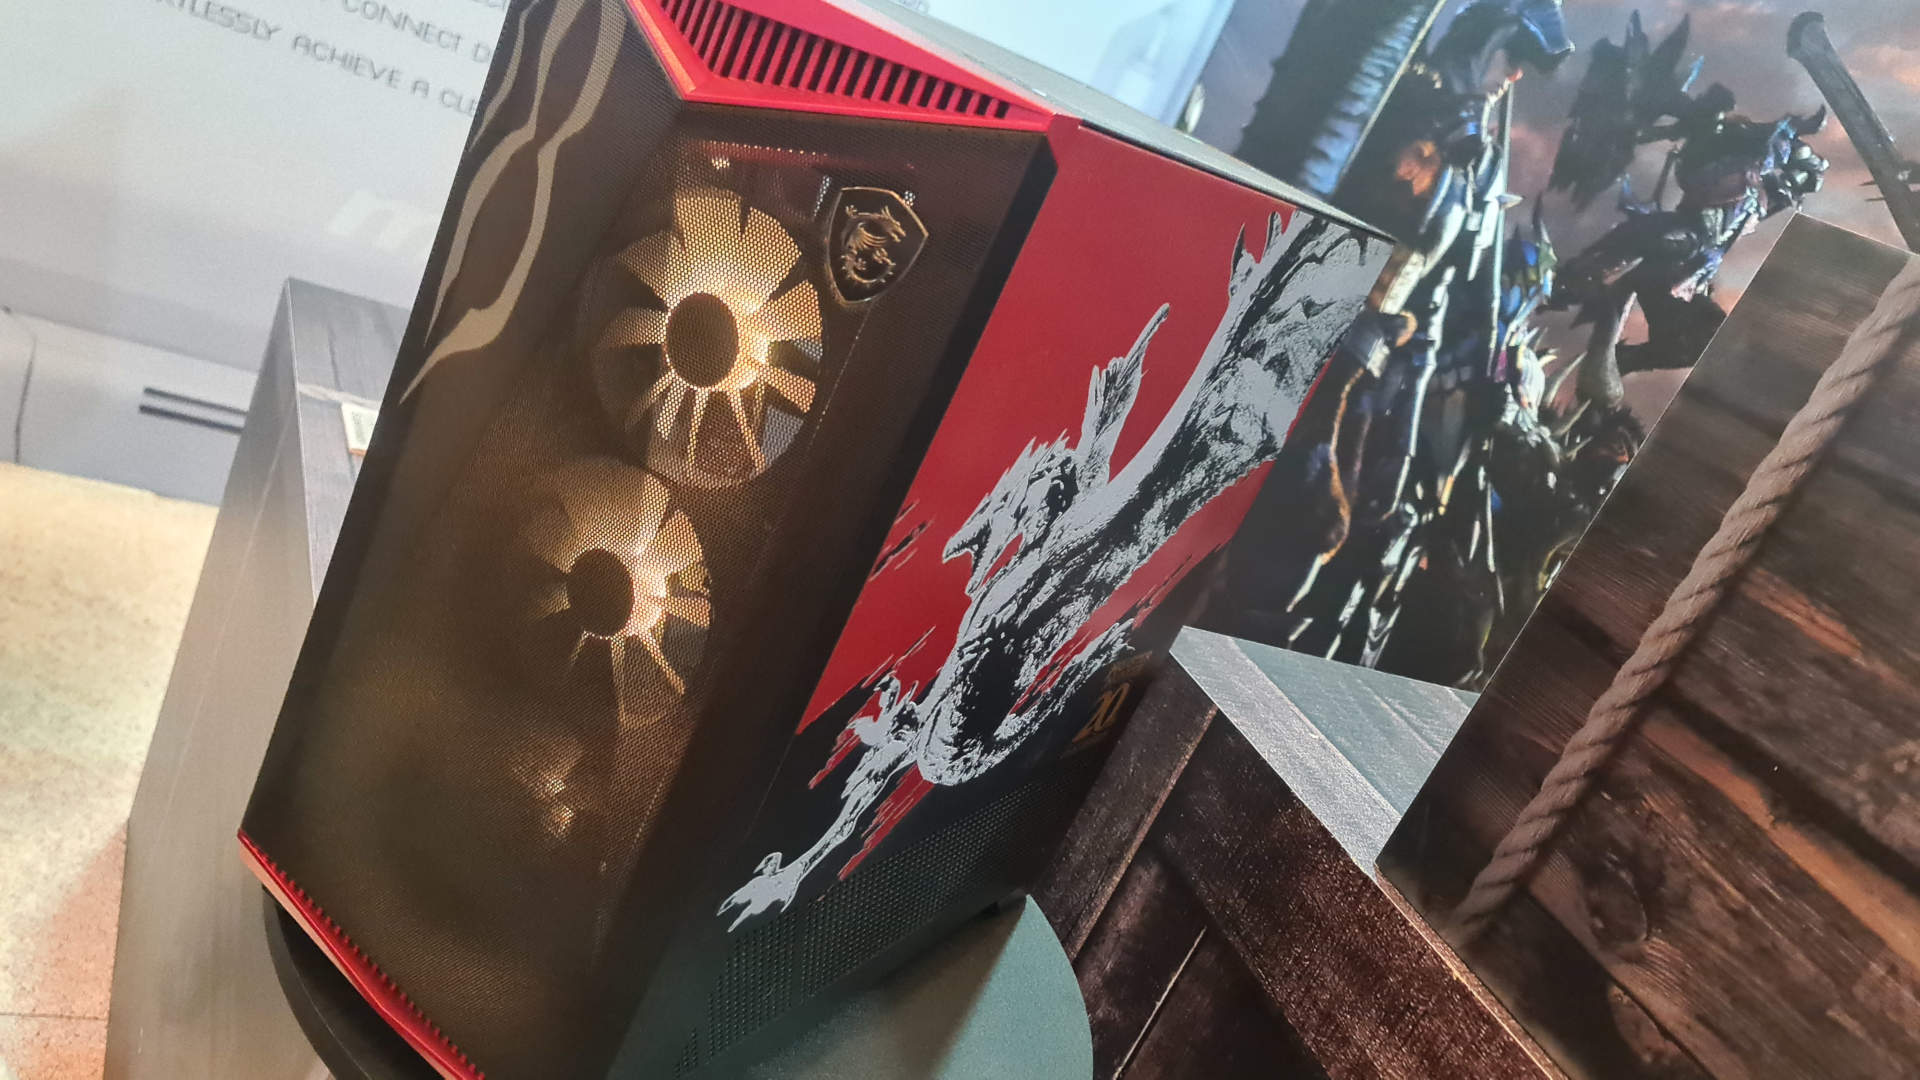 MSI and Capcom colloboration of Monster Hunter themed PC components and products